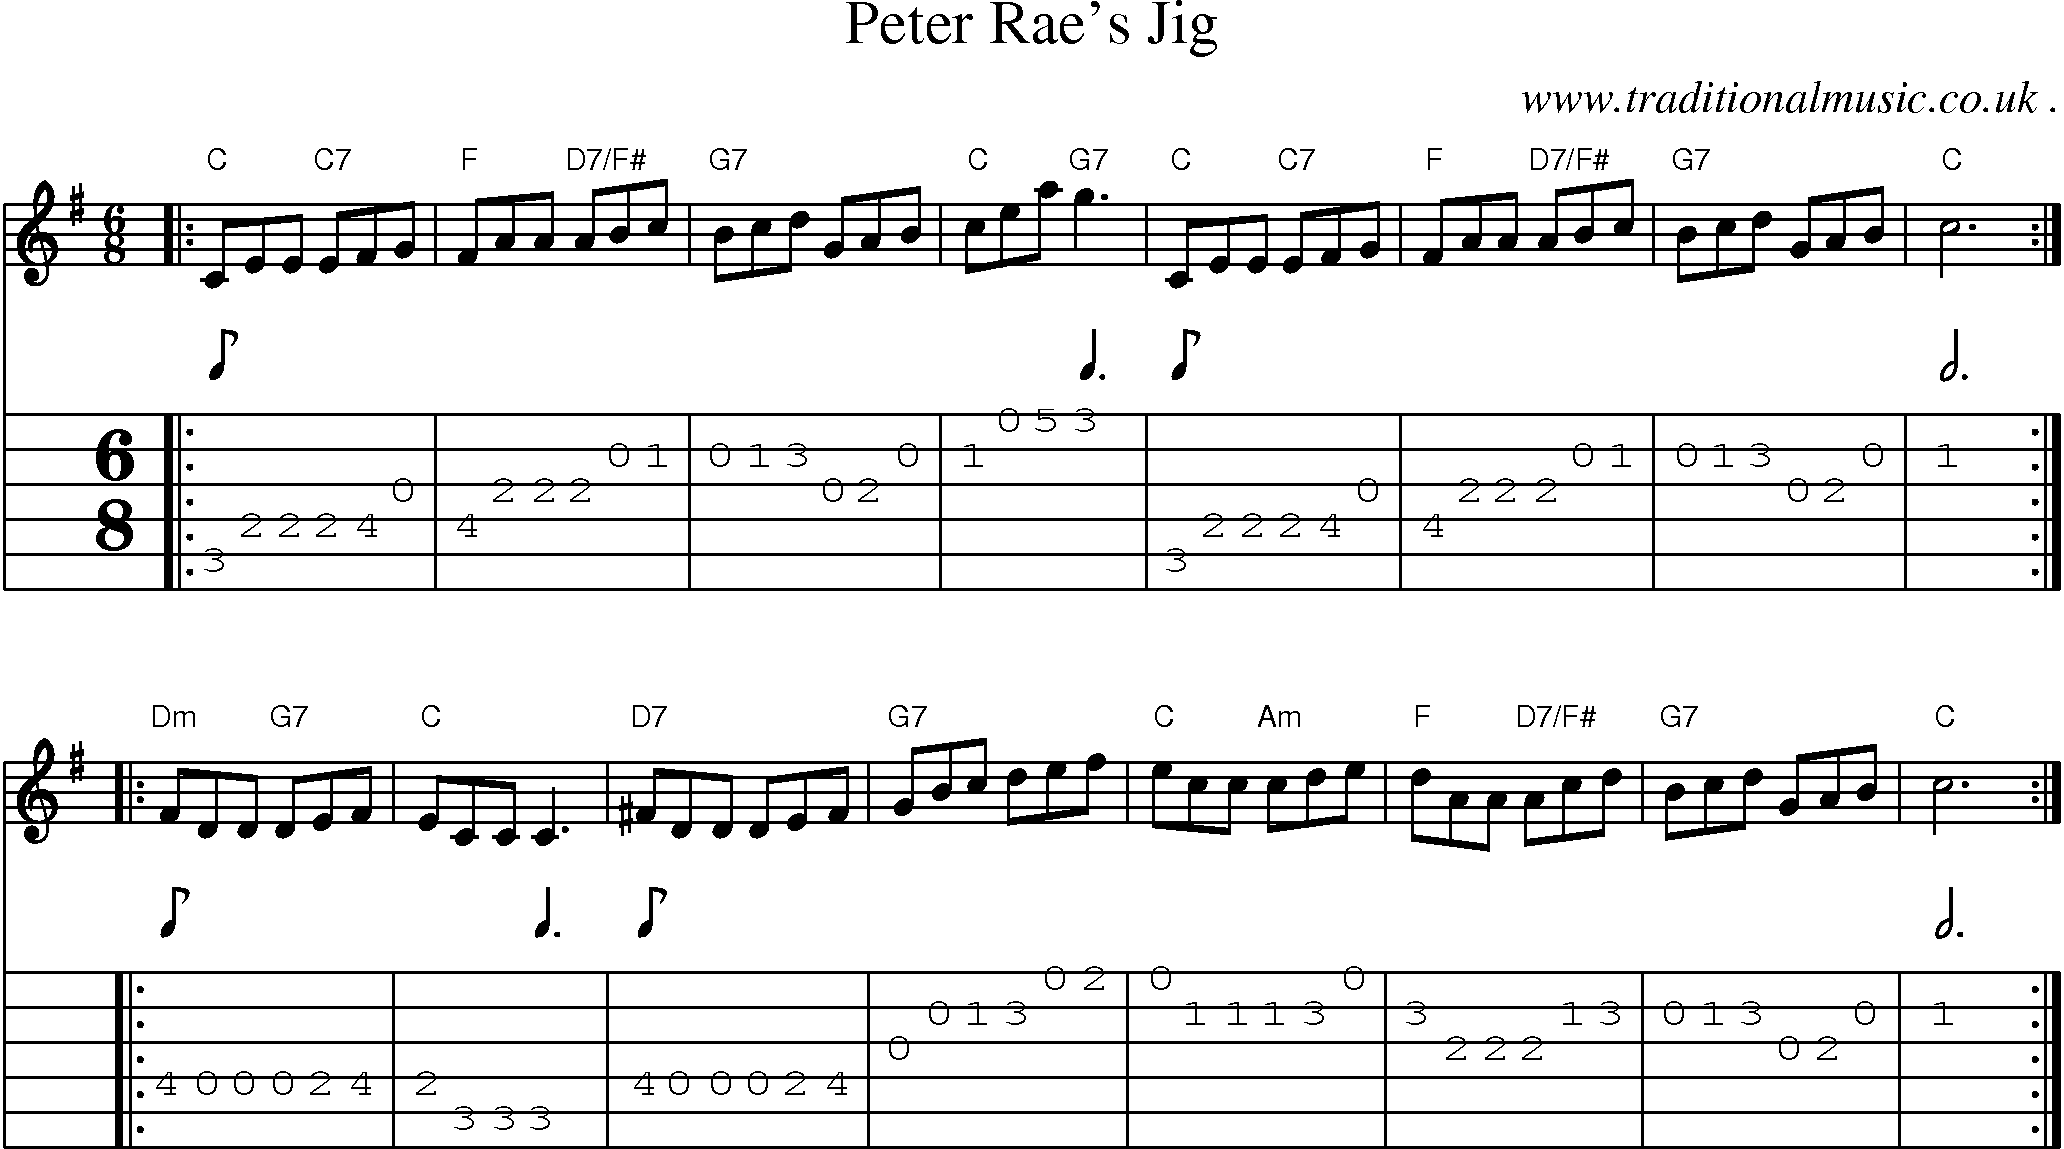 Sheet-music  score, Chords and Guitar Tabs for Peter Raes Jig